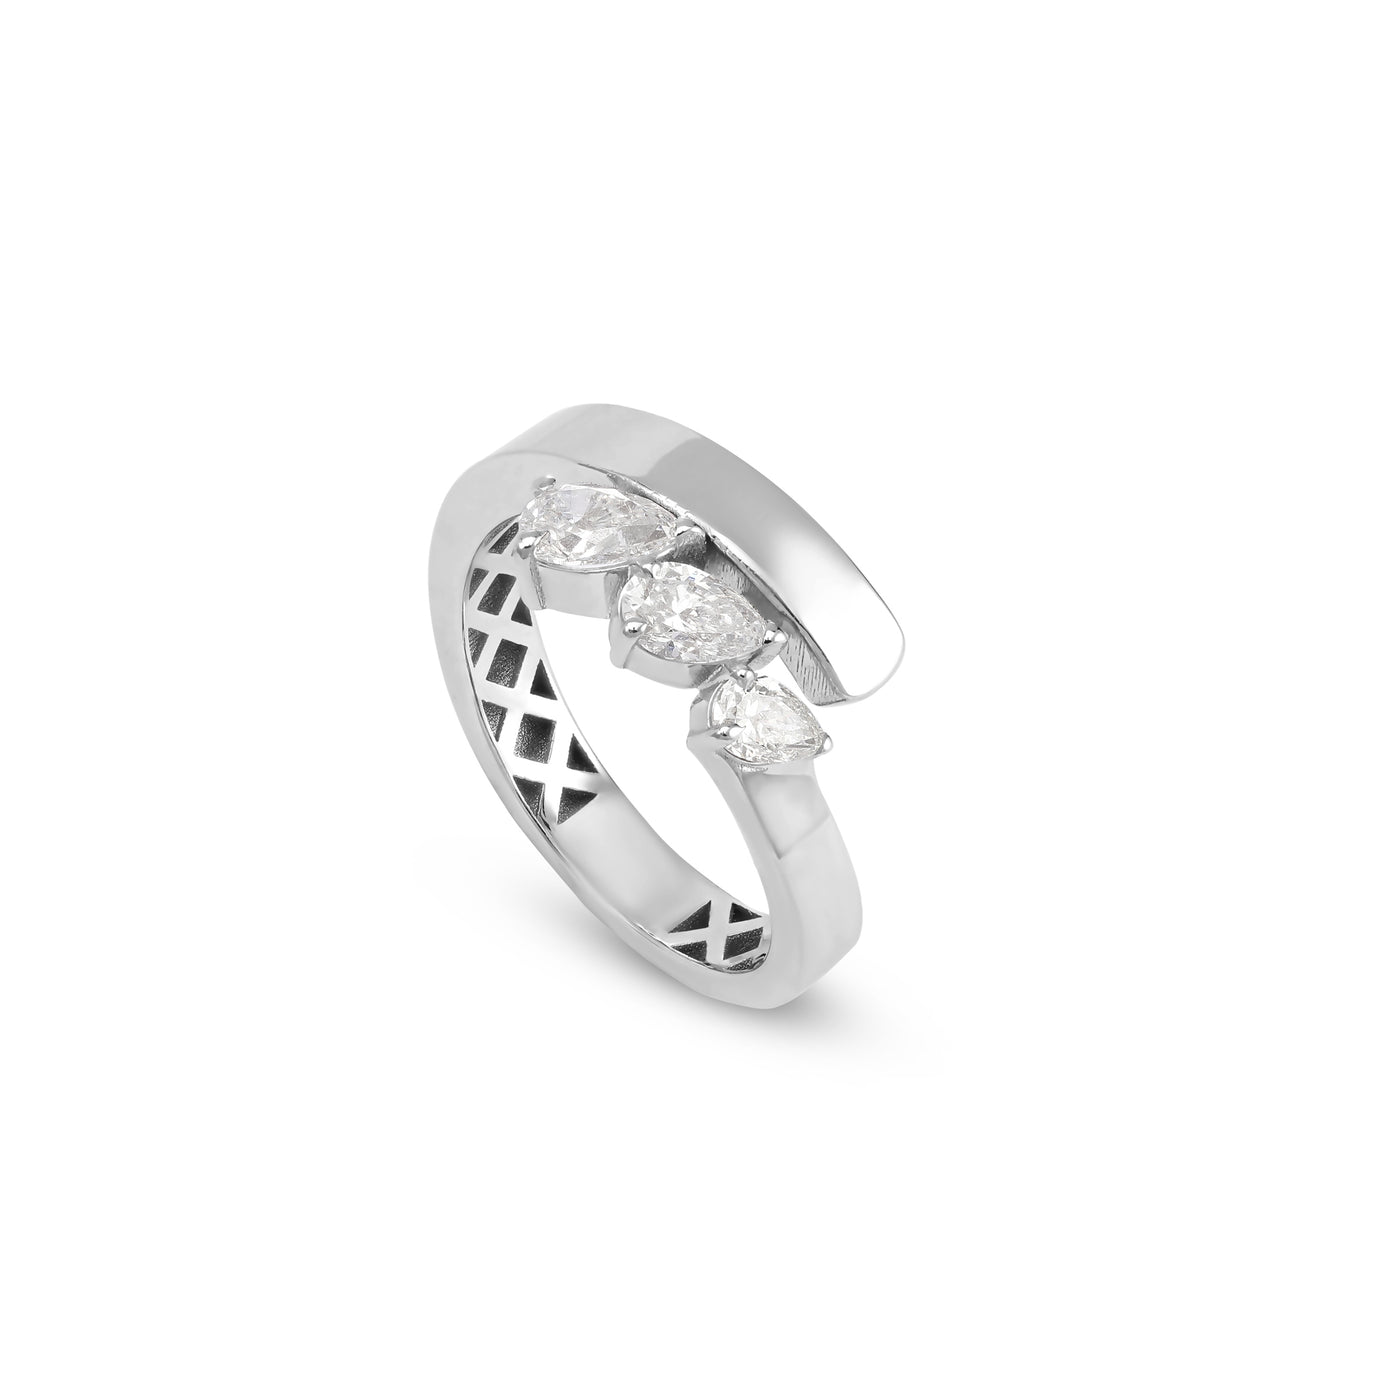 White Gold Twisted Pear Shape Diamond Ring